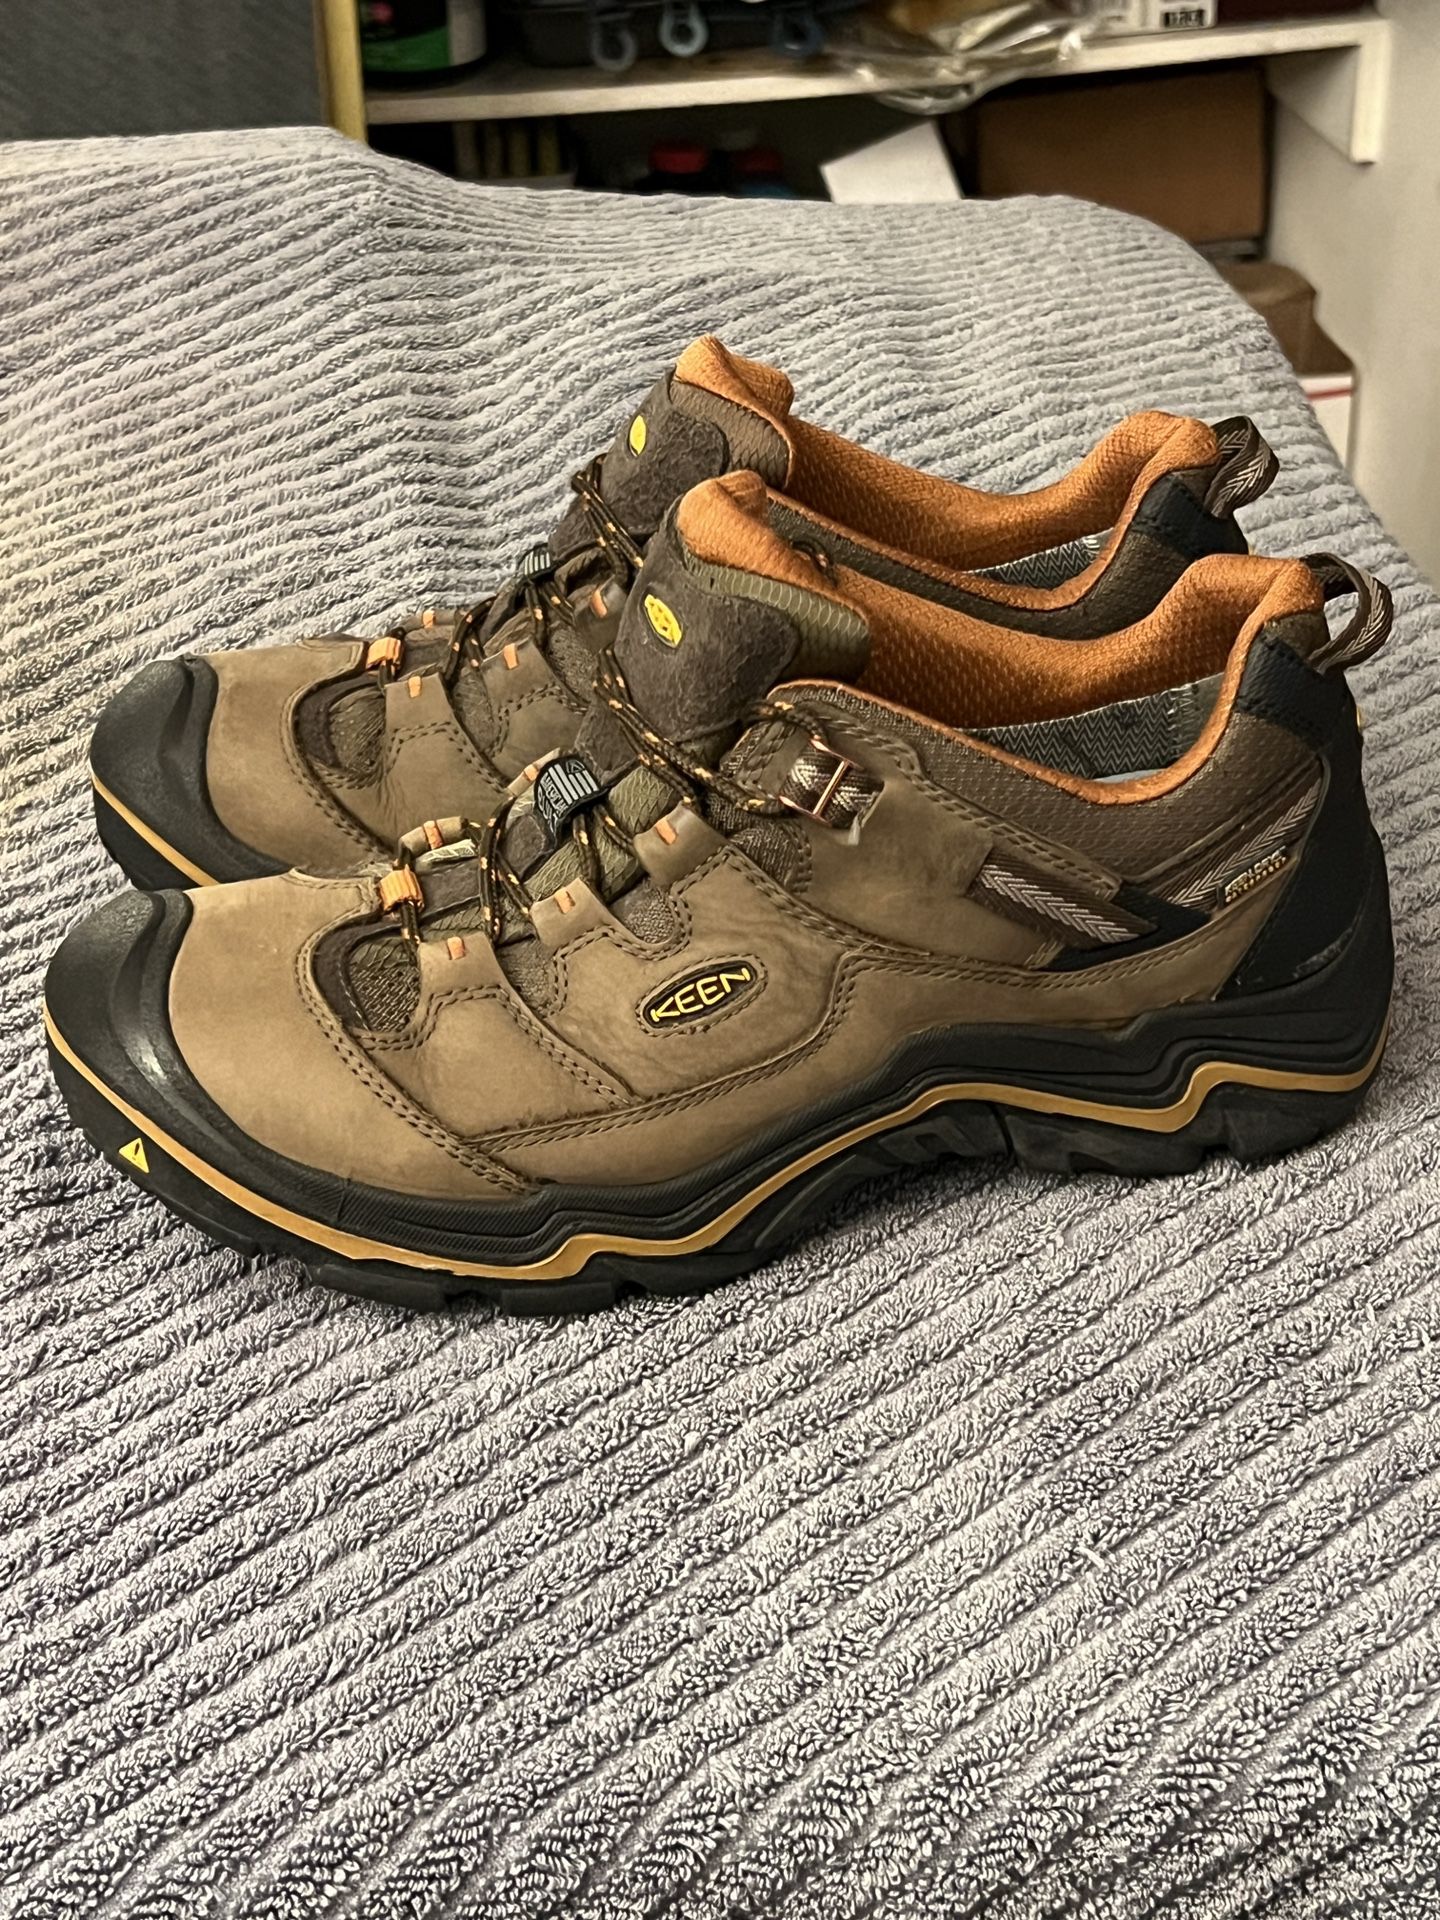 Keen Dry , Water proof, All Waether, All Terrain leather Hiking-Climbing Shoes